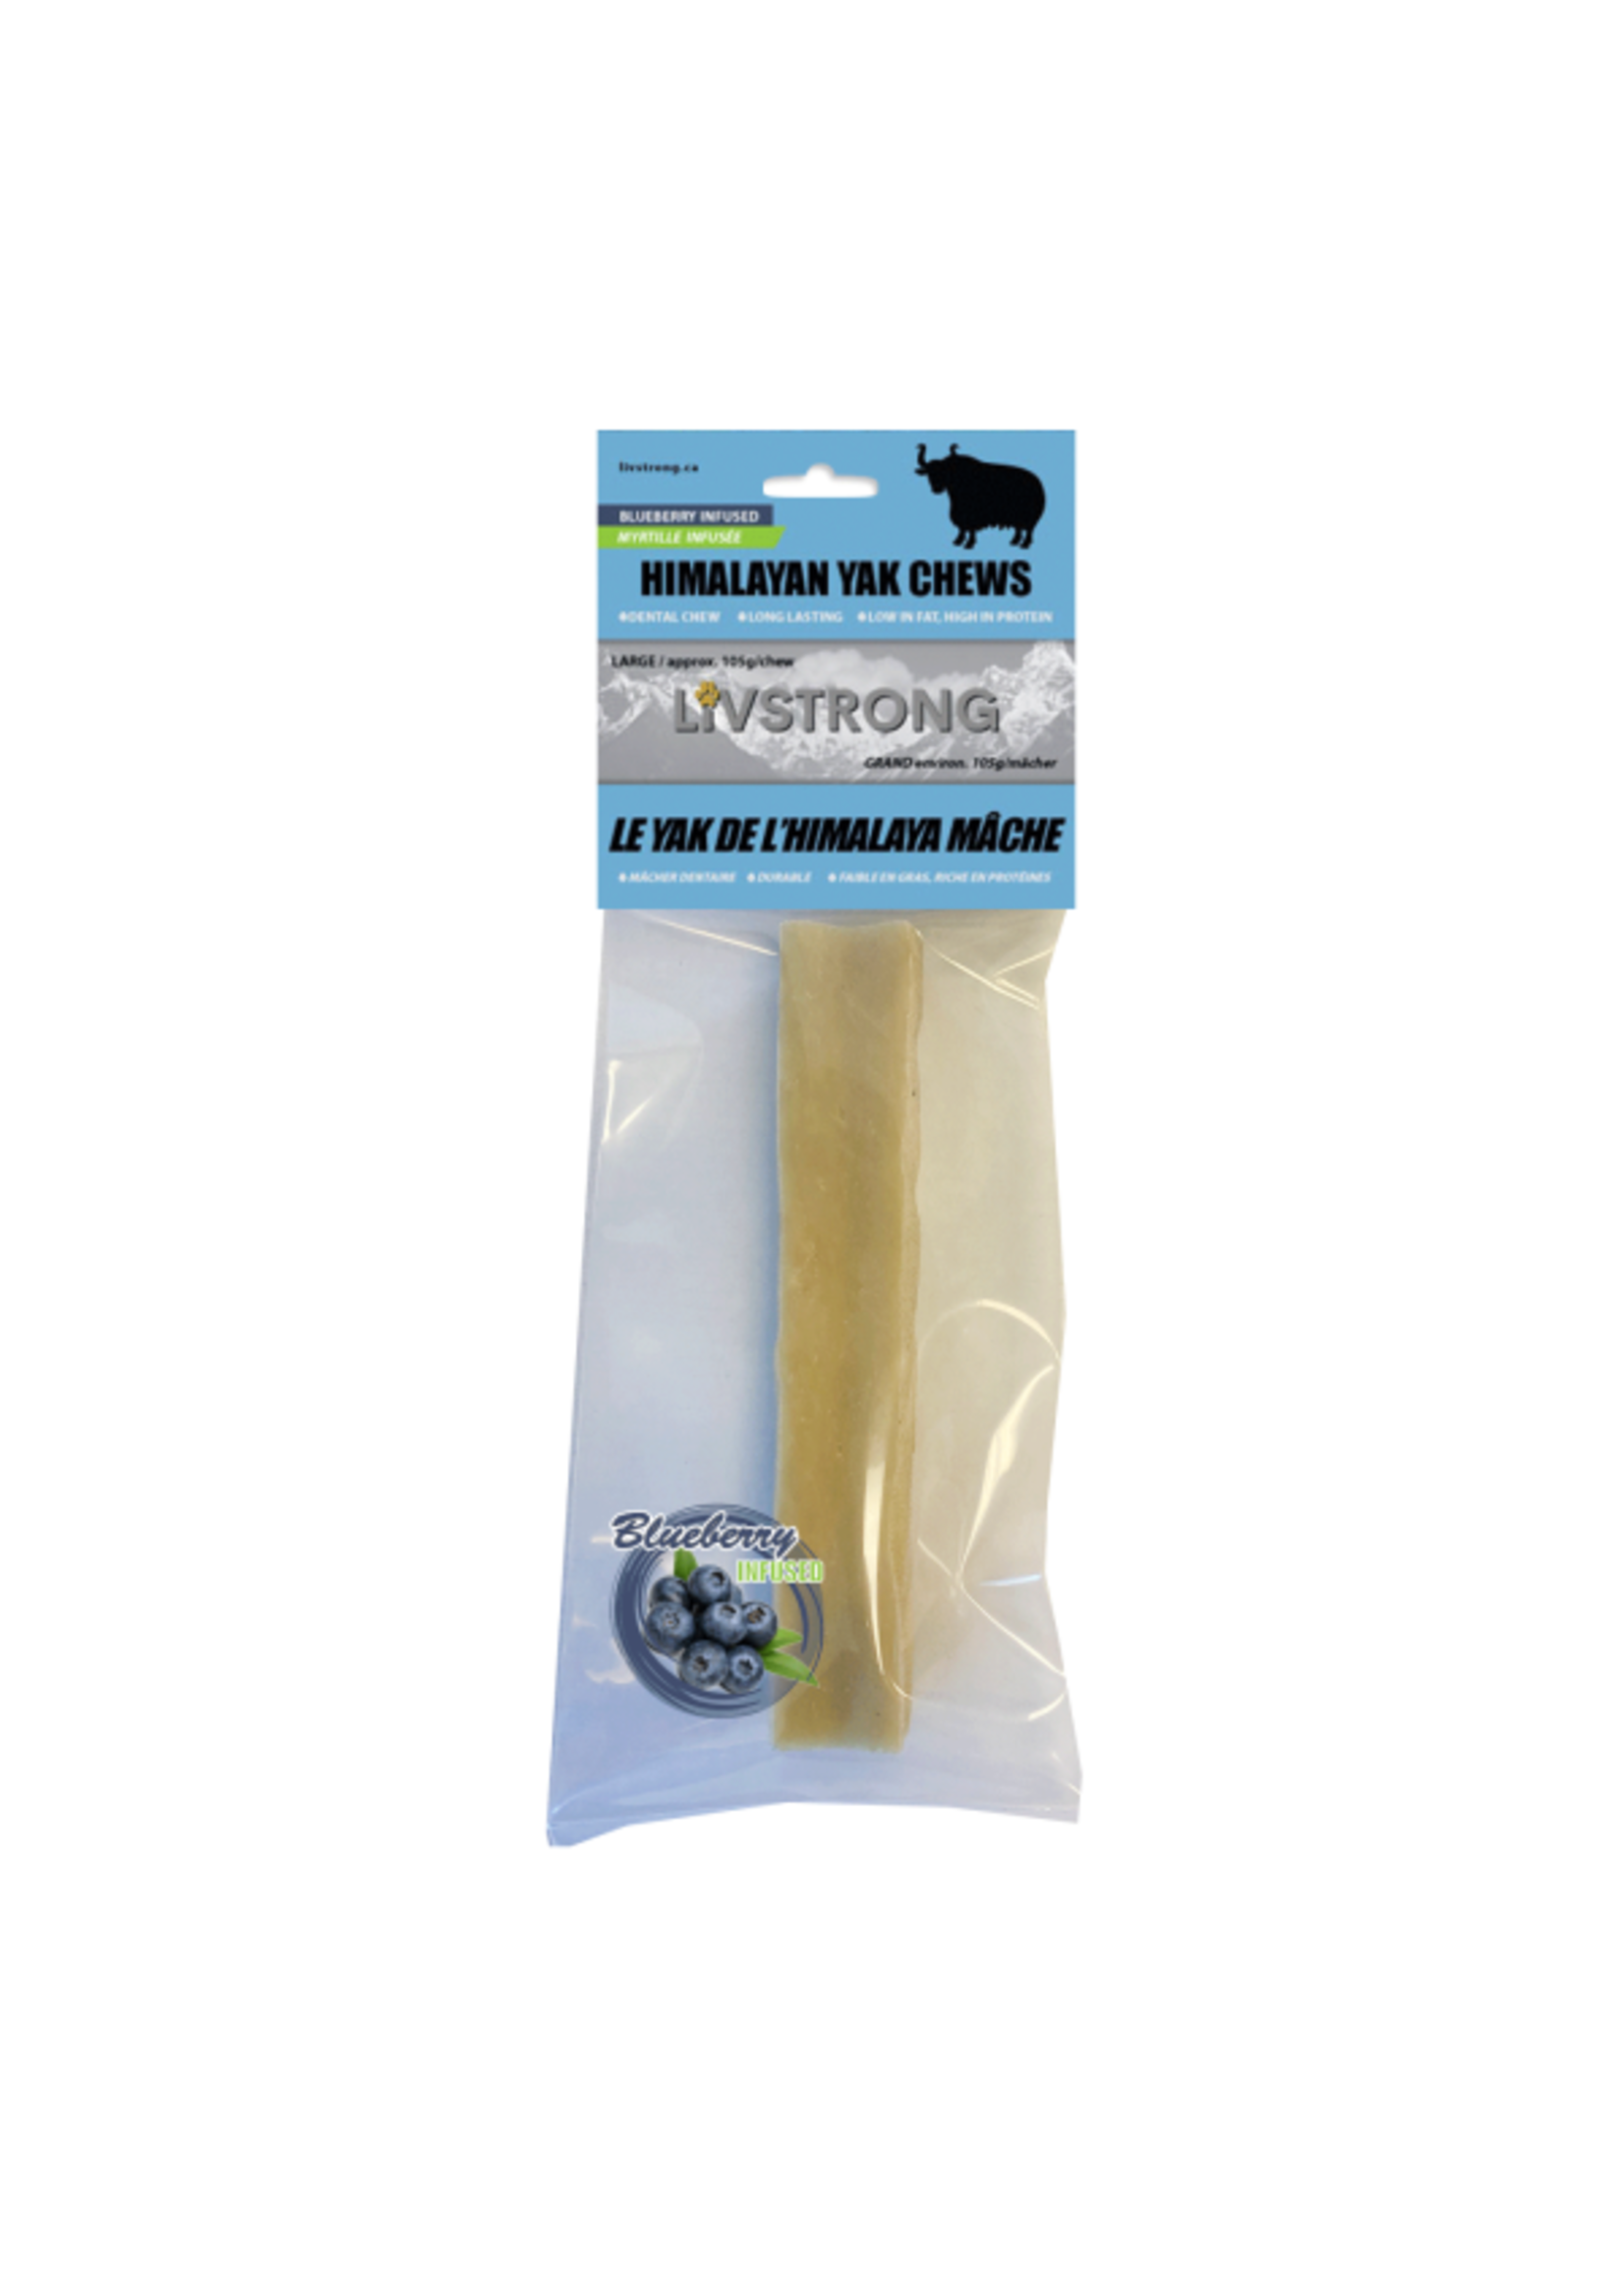 Livstrong Livstrong - Himalayan Yak Cheese Infused w/ Blueberry 105g